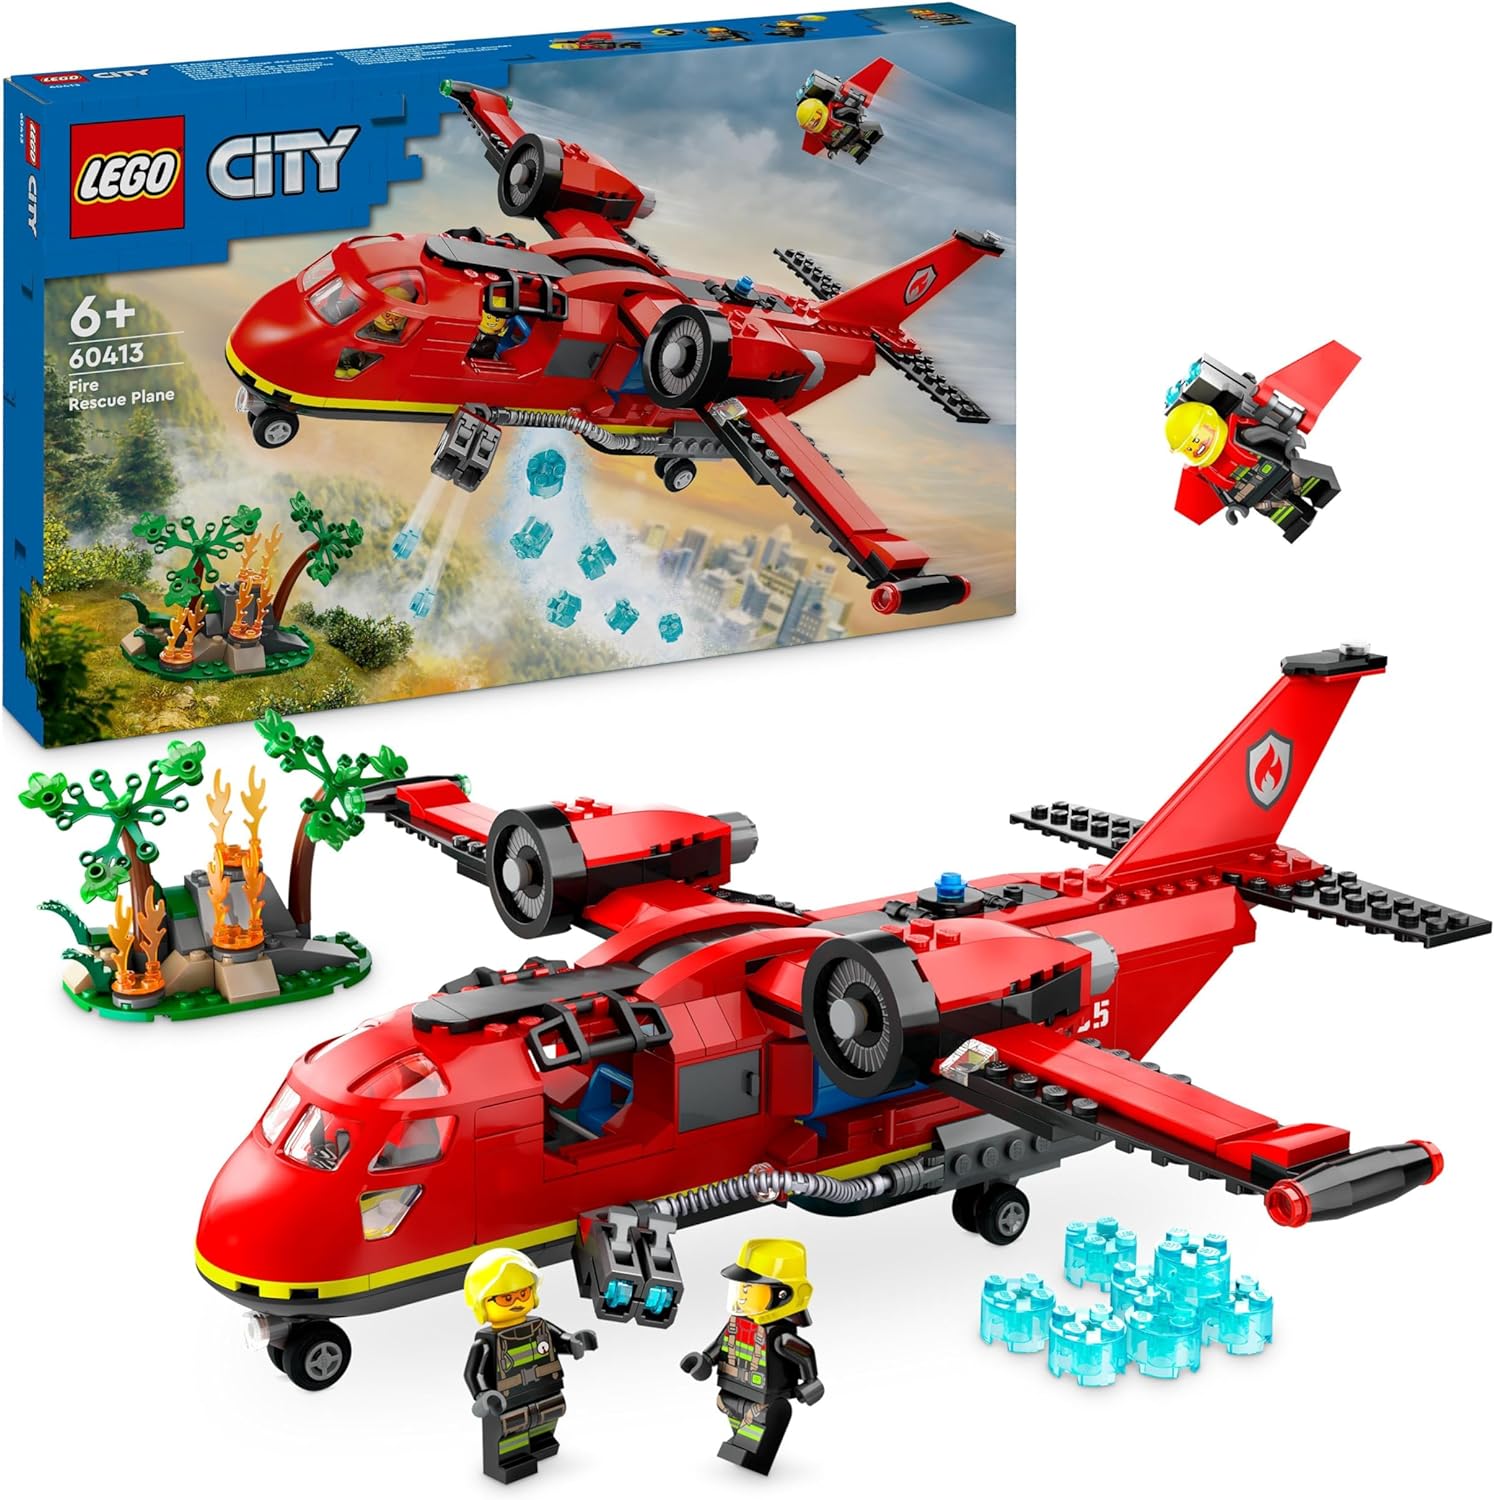 LEGO City Fire Plane, Fire Brigade Set with Airplane Toy for Children, Construction Set with 3 Firefighter Figures and Fire Backdrop, Great Gift Idea for Boys and Girls from 6 Years 60413